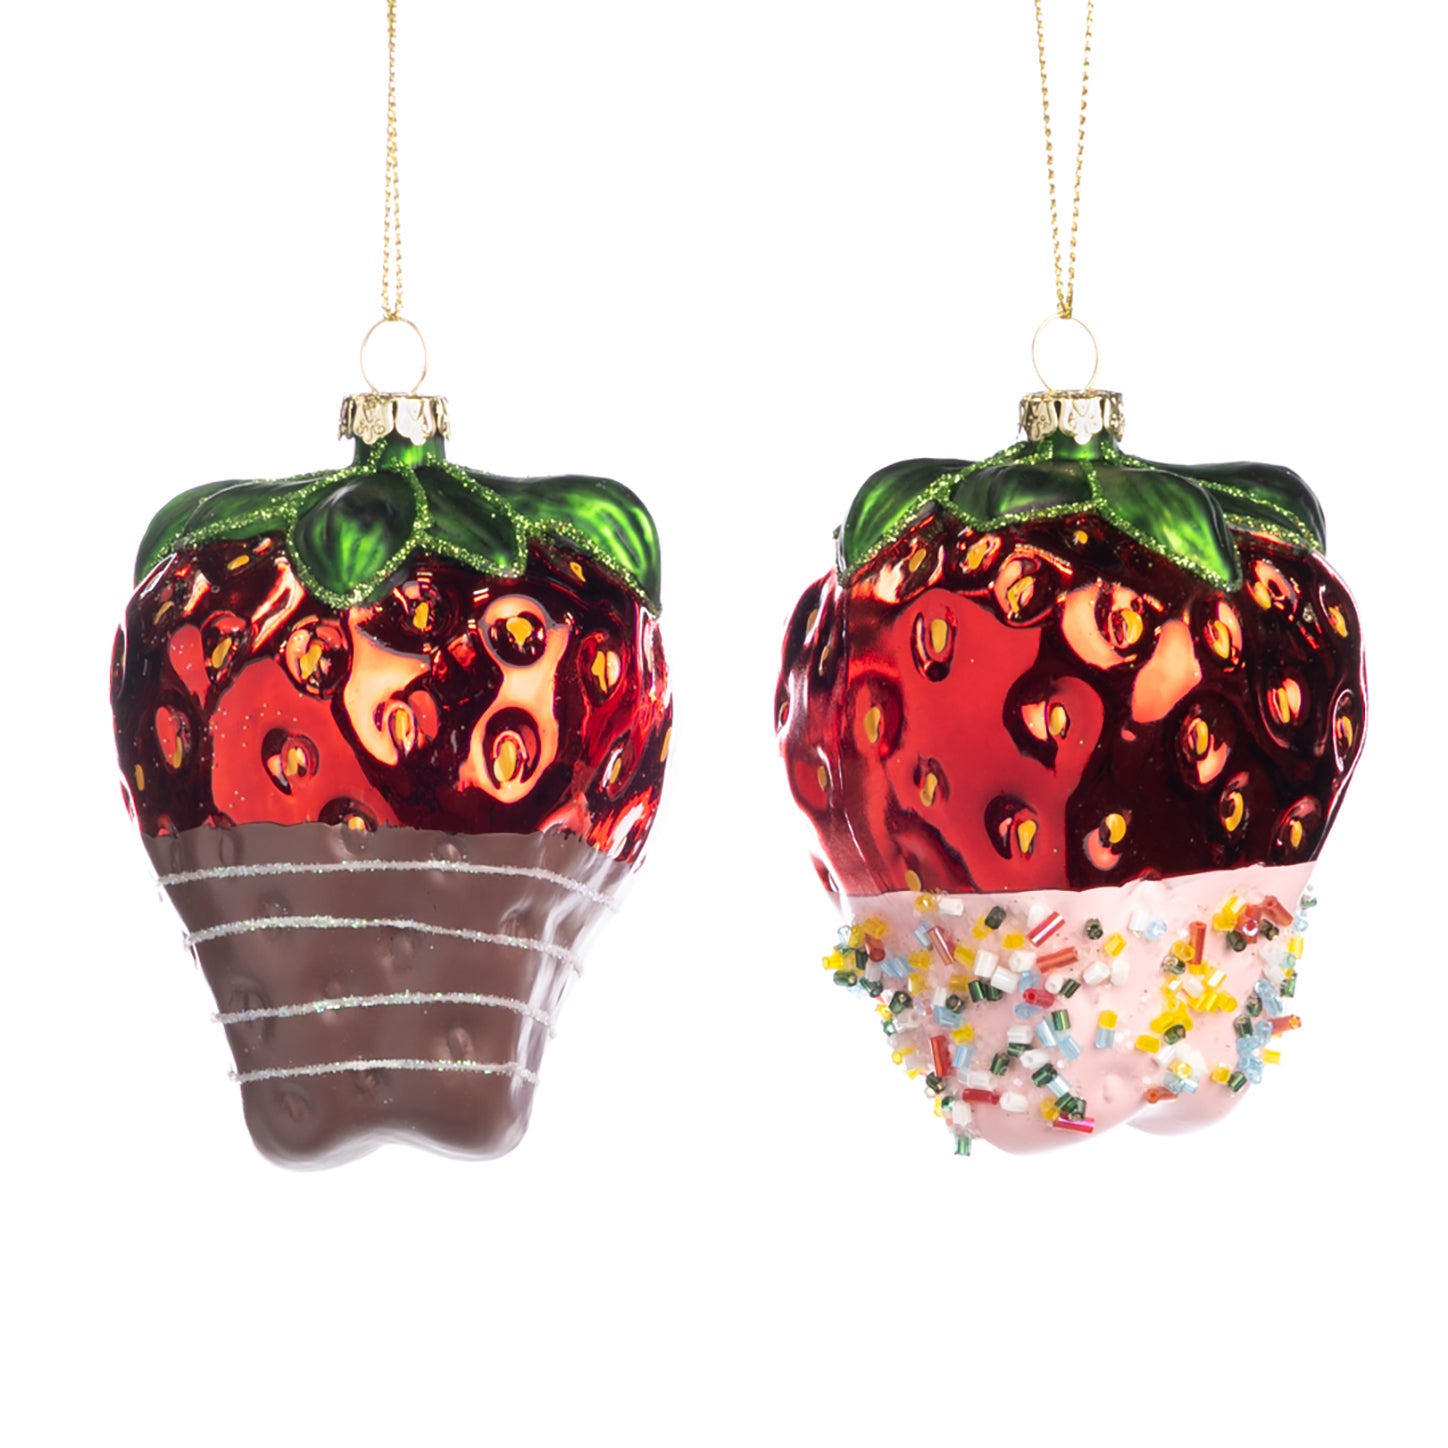 Chocolate dipped strawberry glass ornament